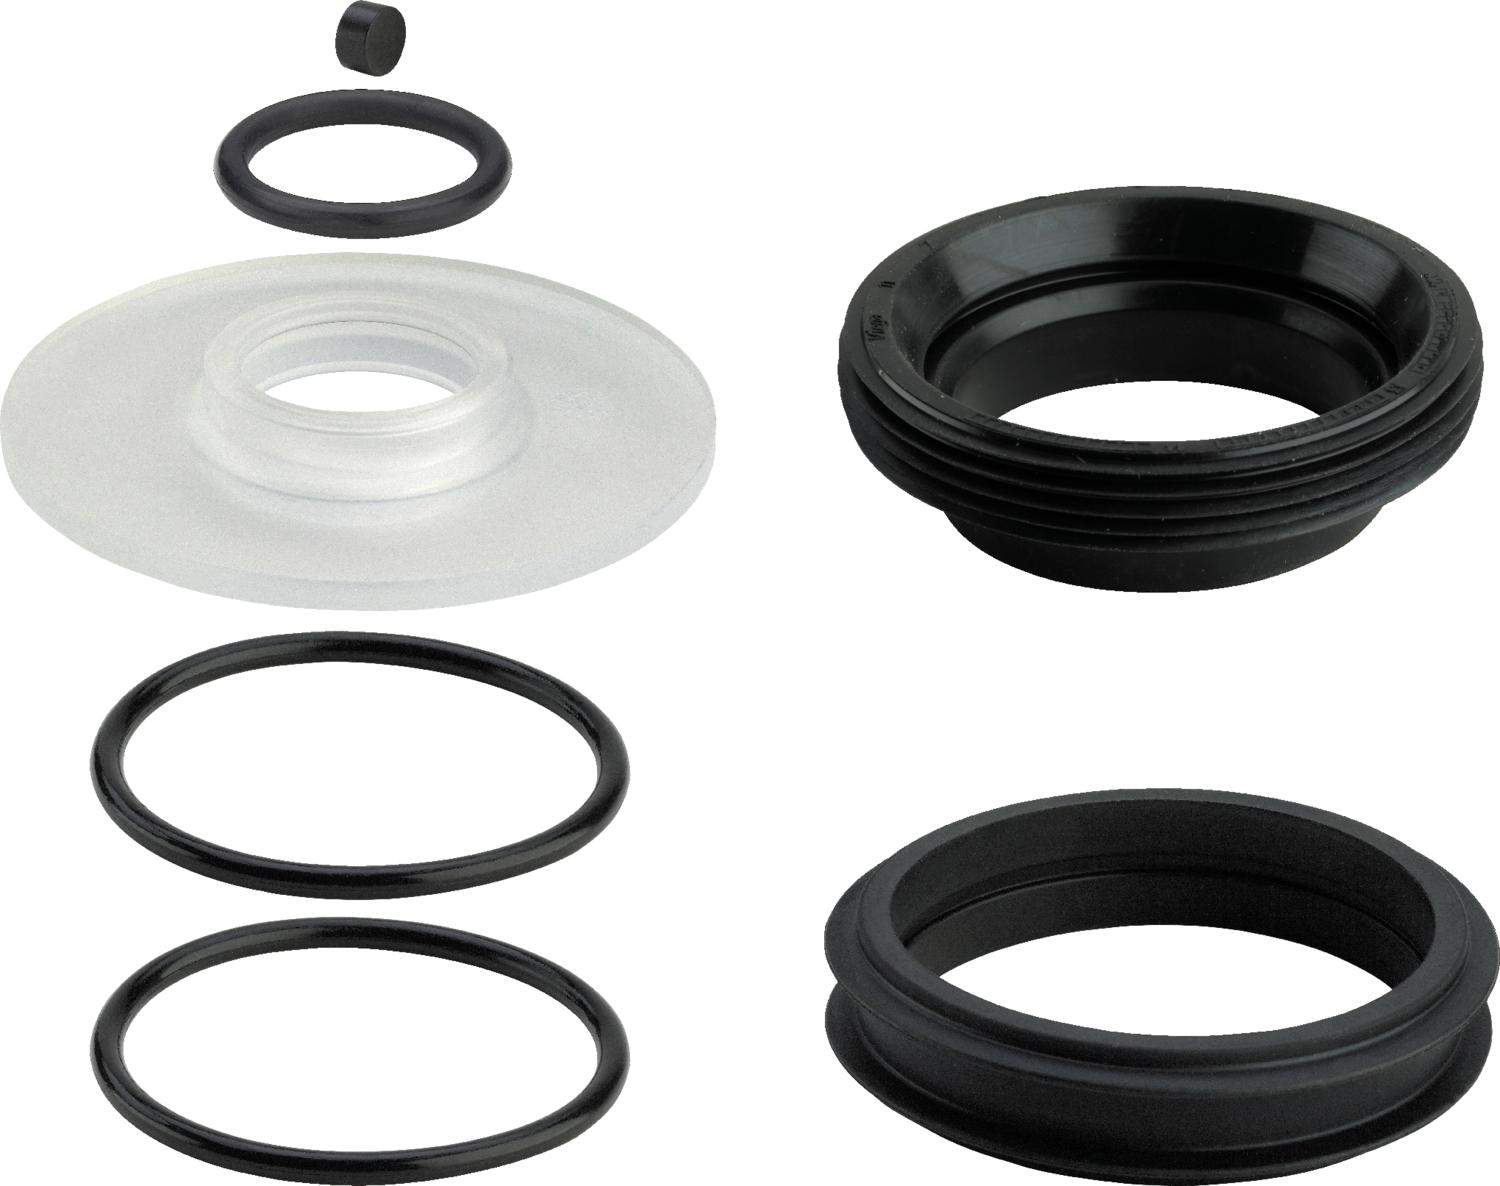 Gasket kit for VIEGA ECO-PLUS stand from 1999 to 2019